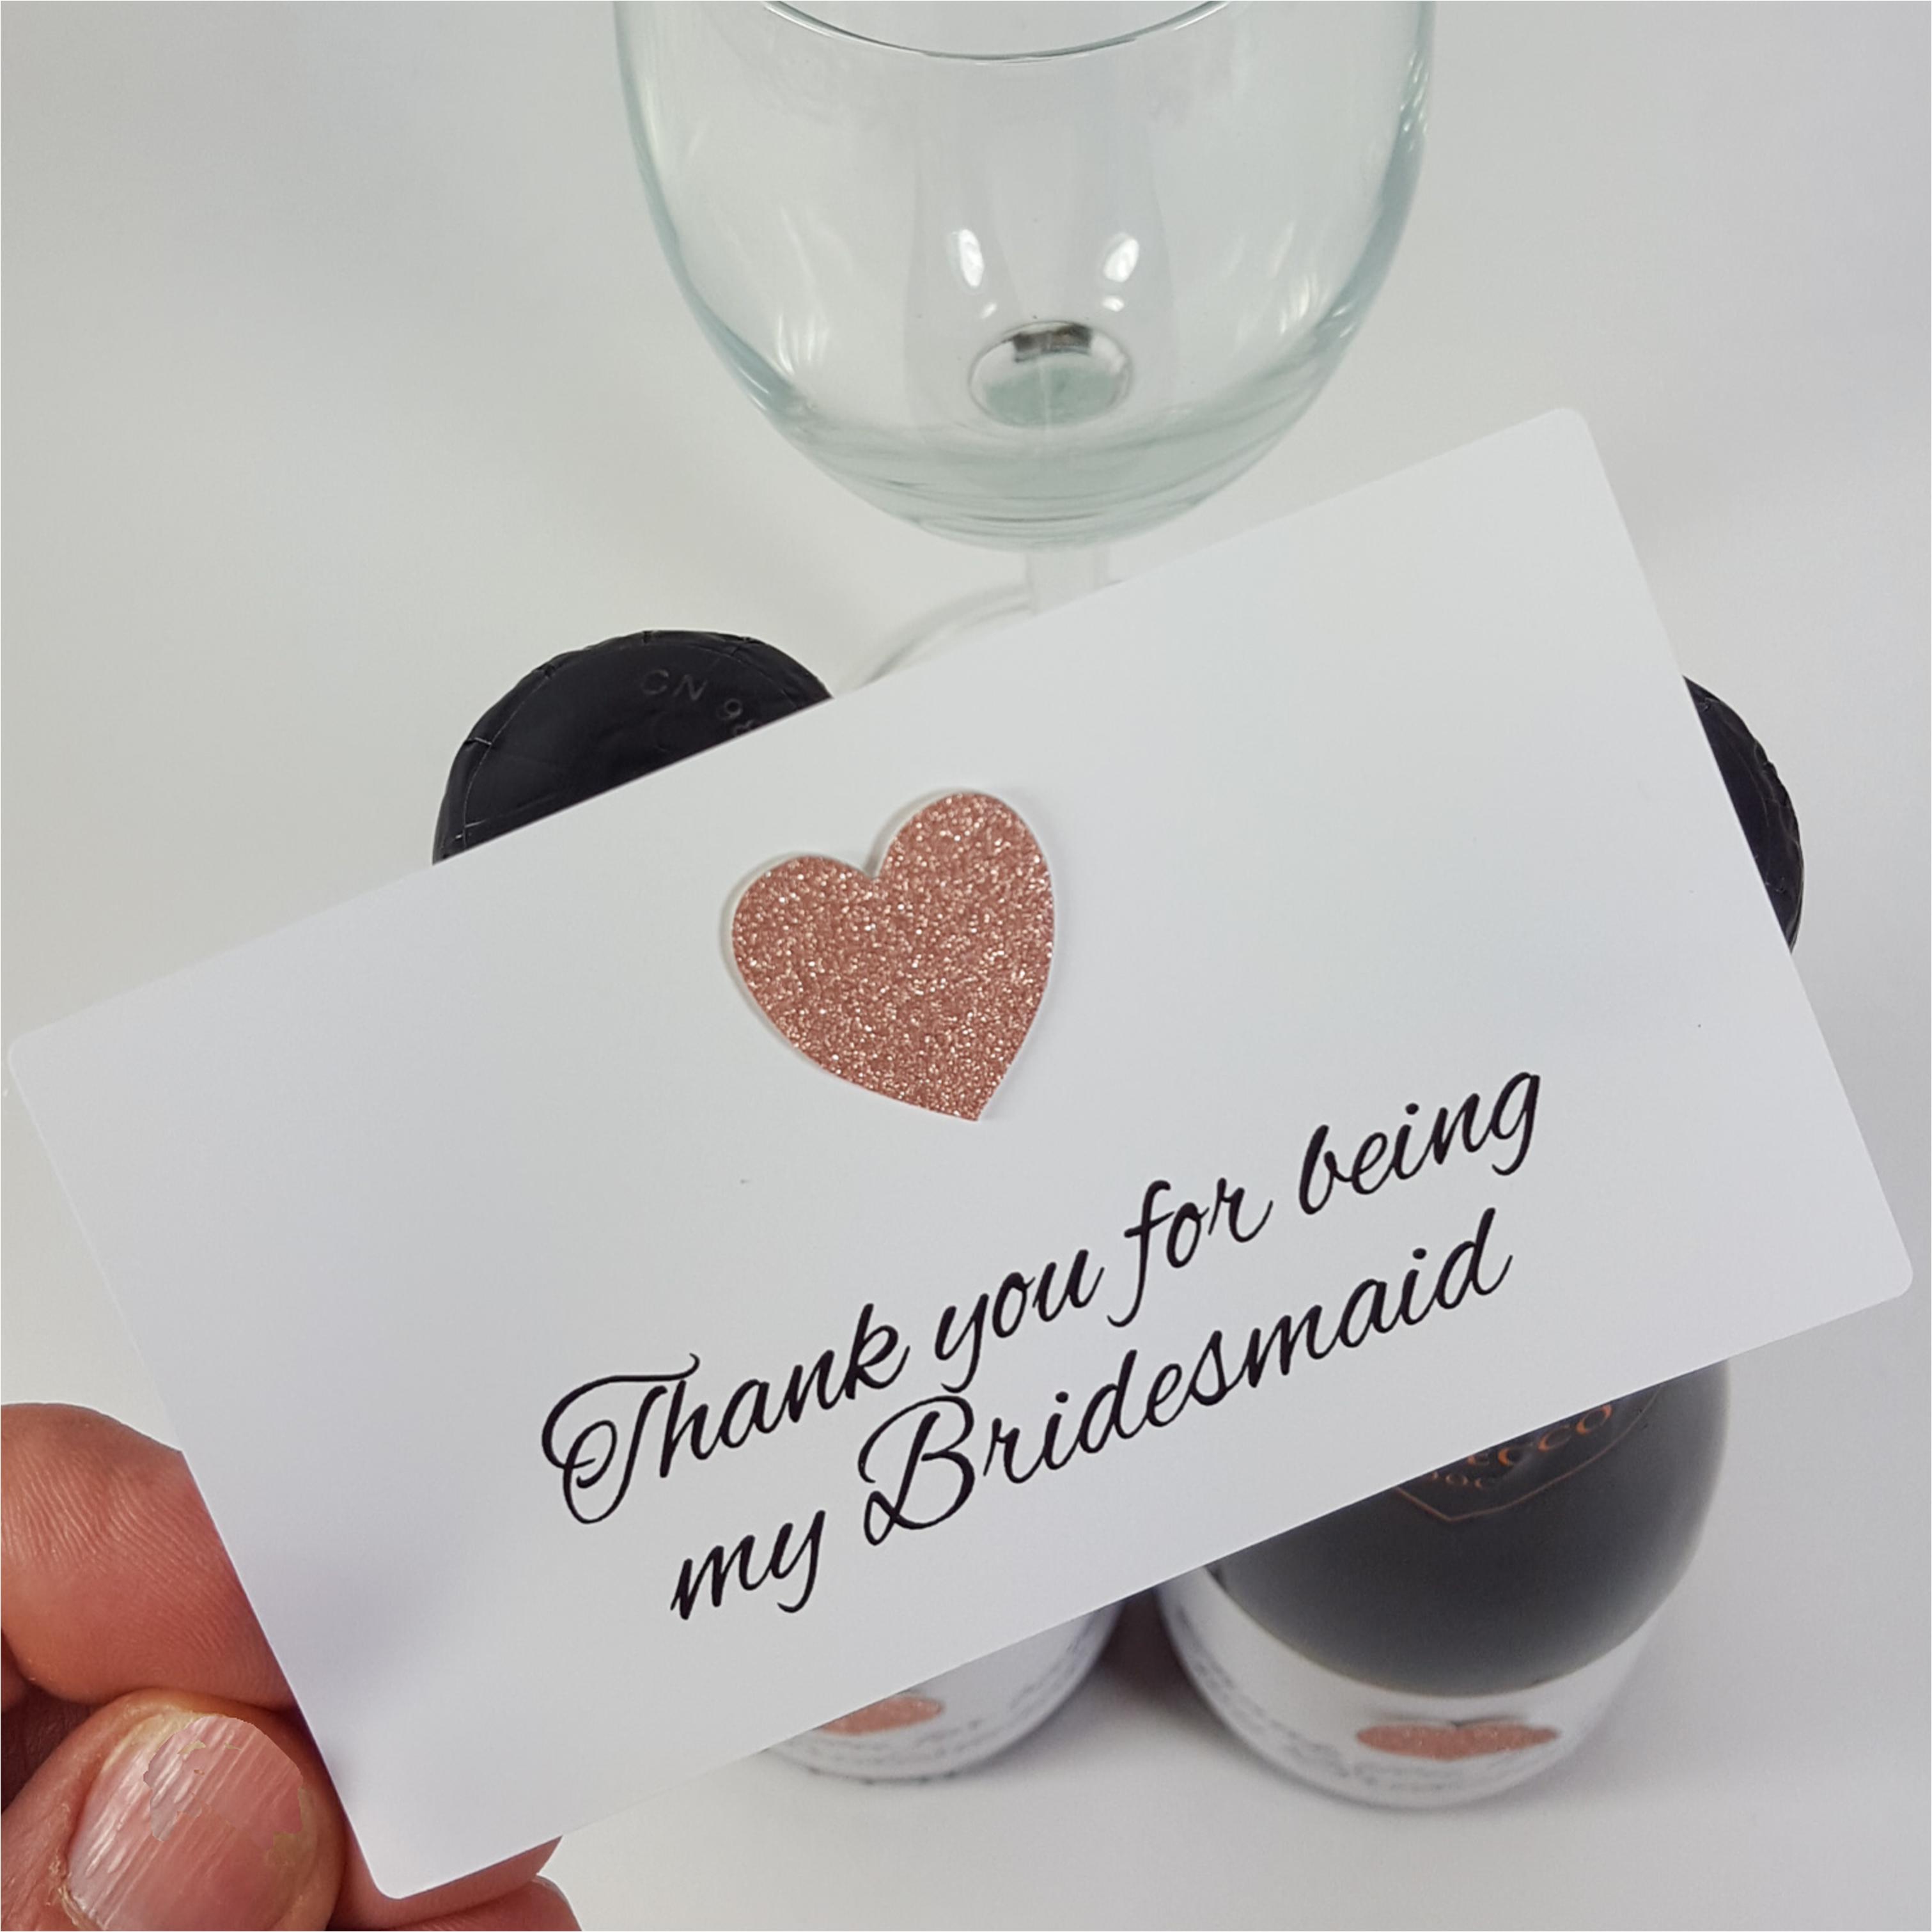 Rose gold glitter heart on Thank you bridesmaid mii wine bottle labels